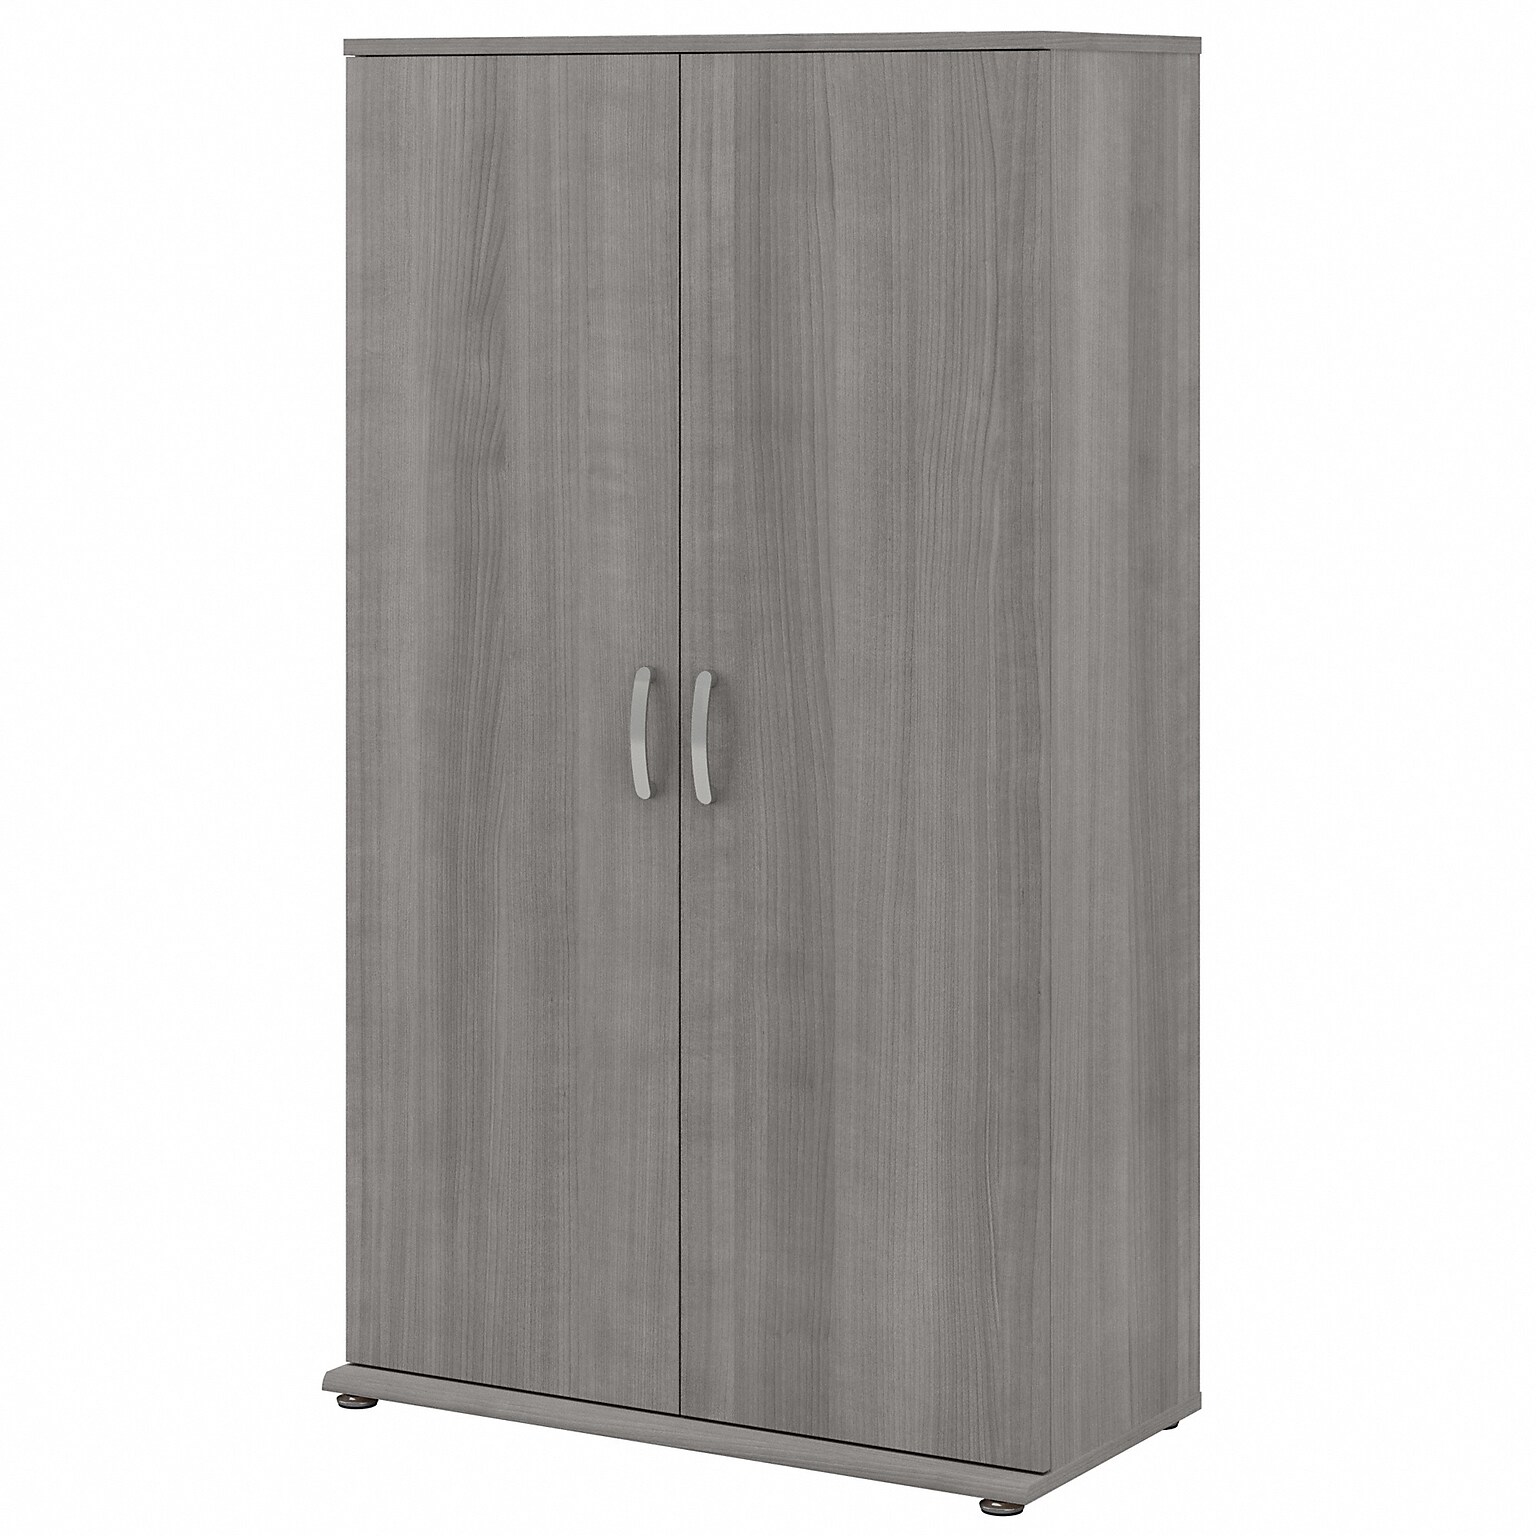 Bush Business Furniture Universal 62 Tall Storage Cabinet with Doors and 5 Shelves, Platinum Gray (UNS136PGK)